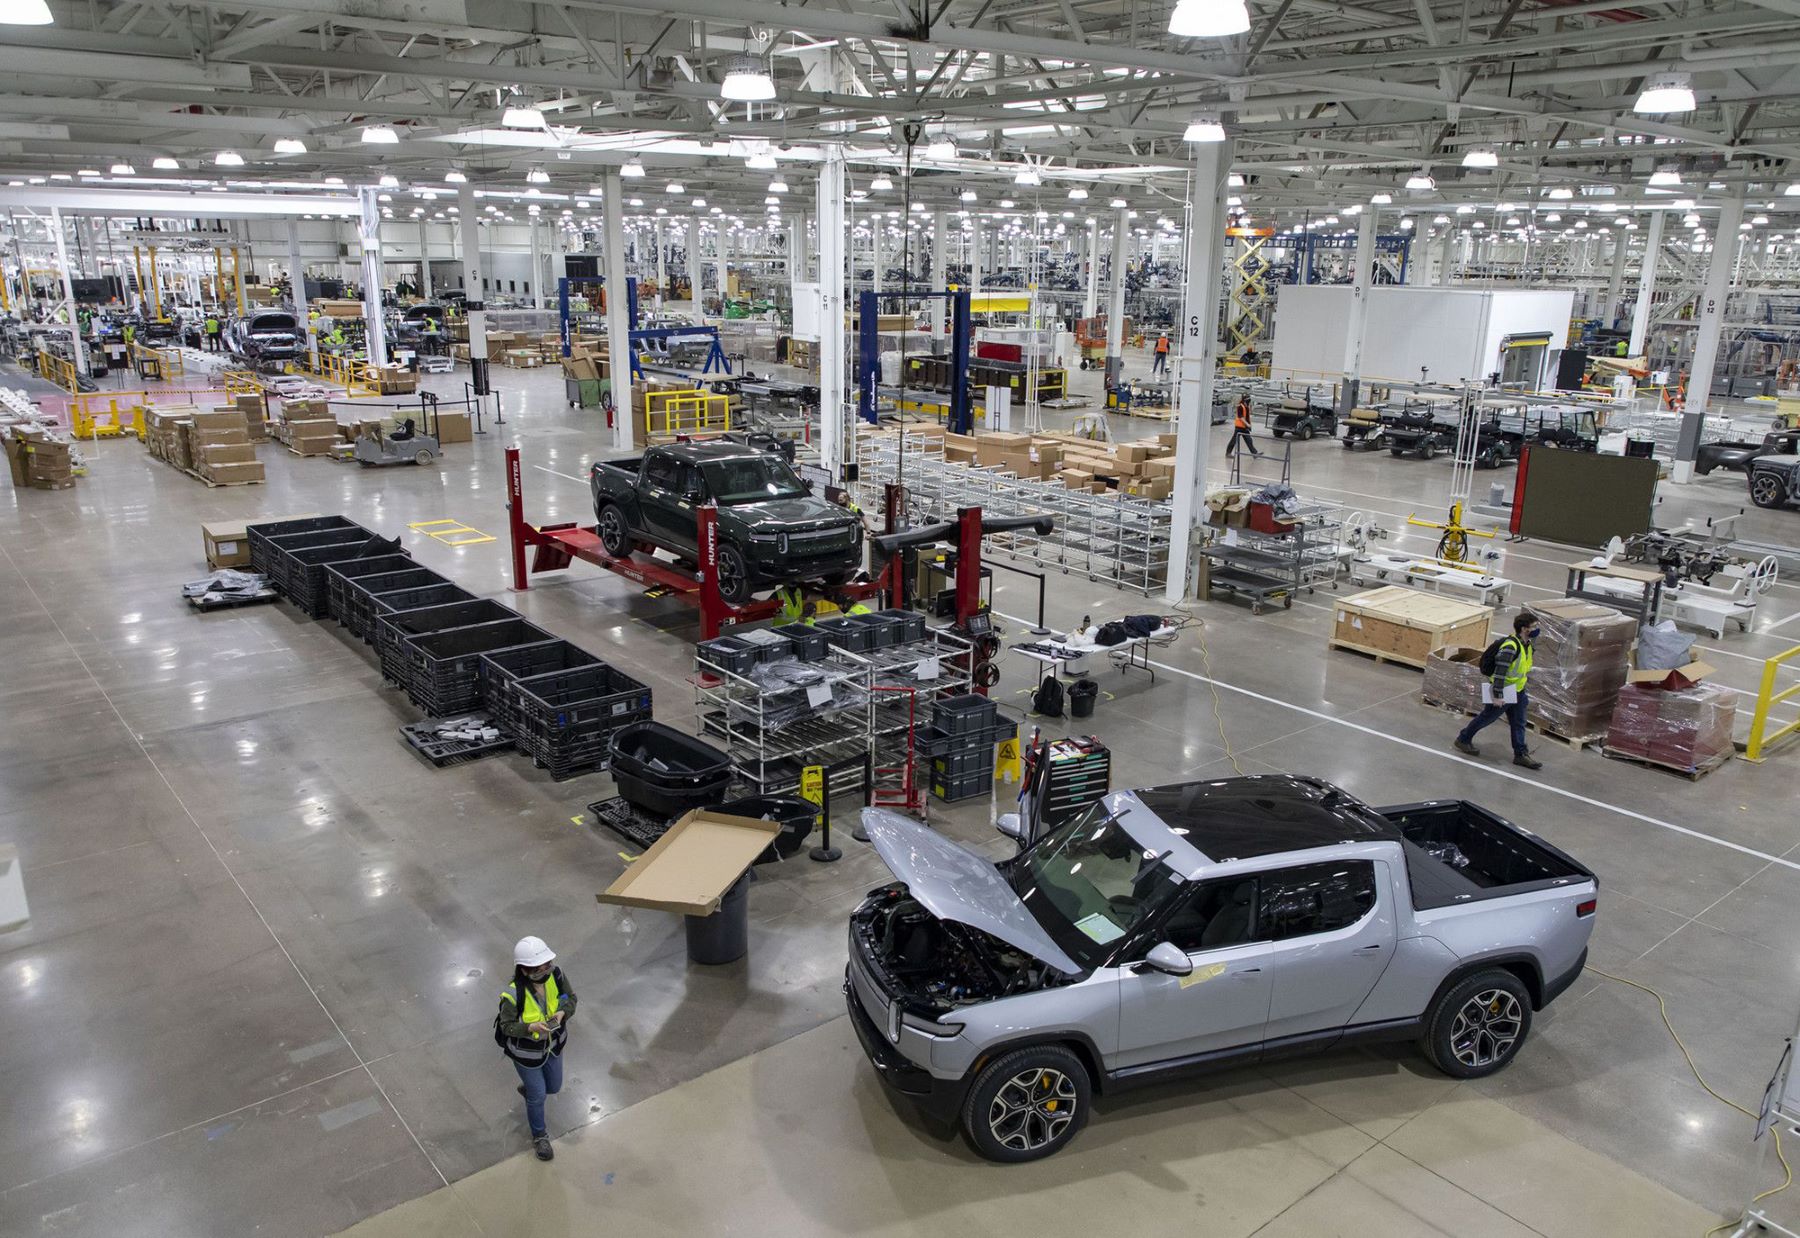 A Rivian plant production in Normal, Illinois, before the announcement of a second plant location in Georgia